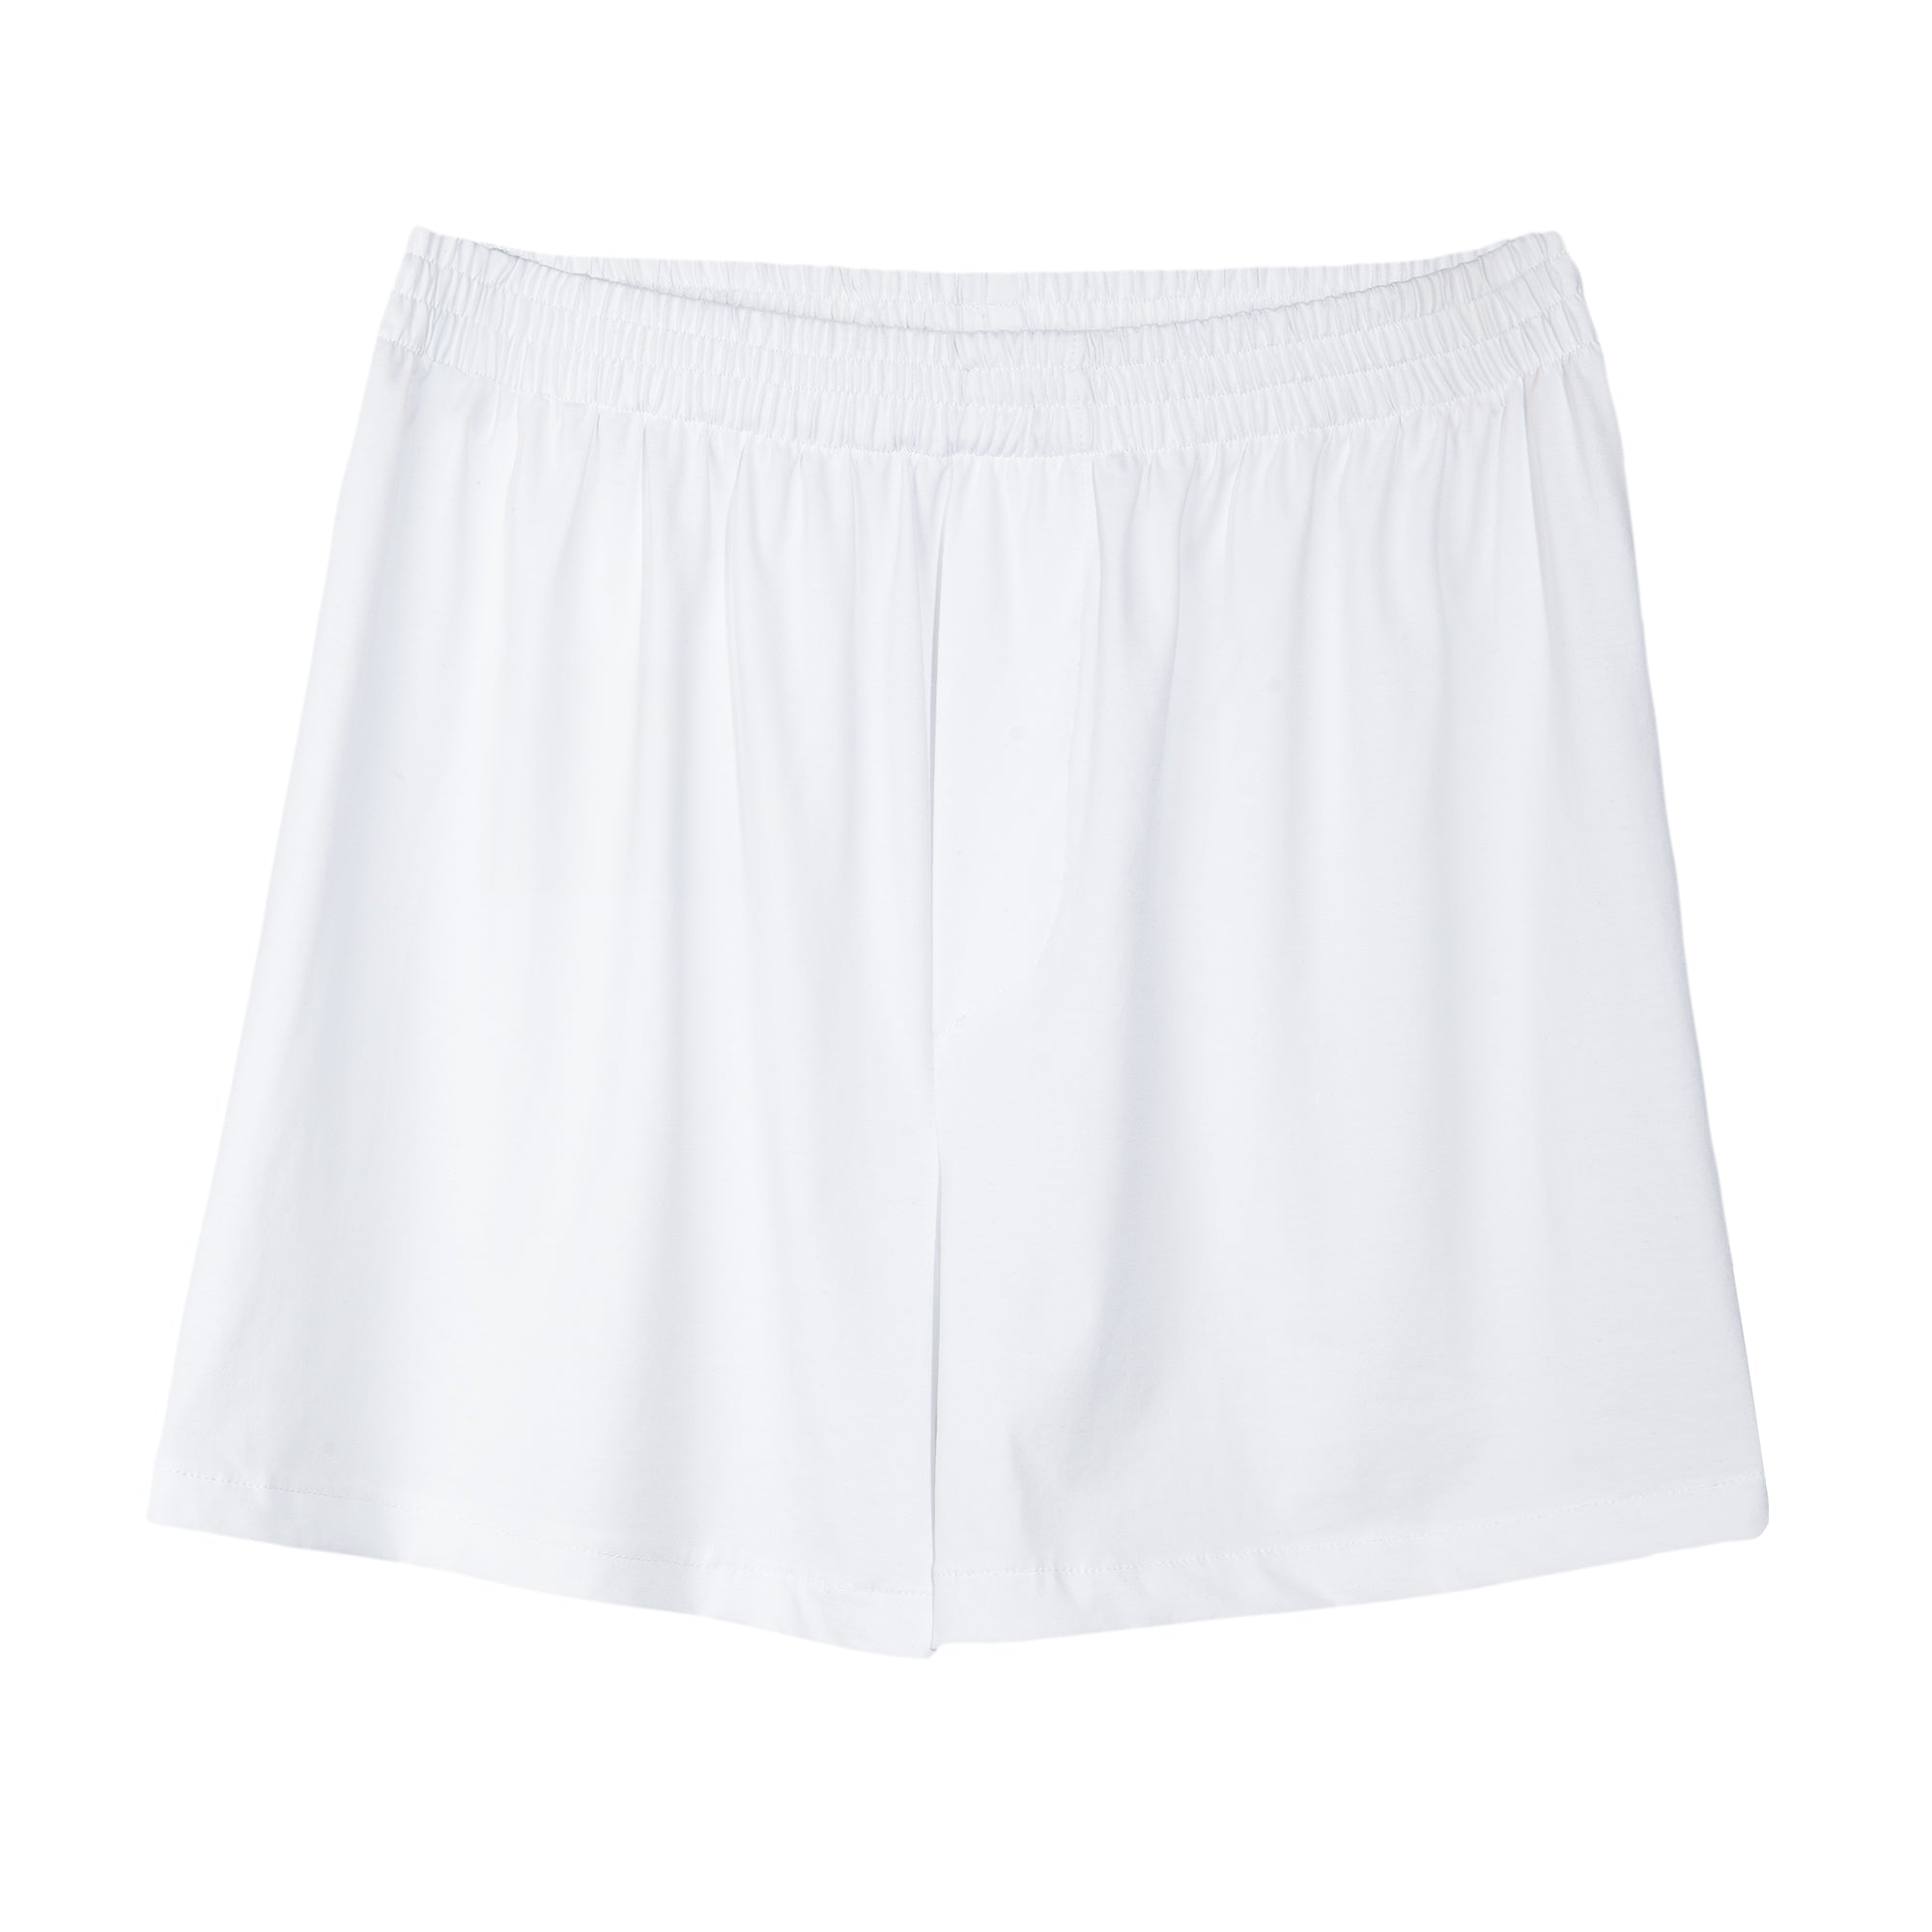 LaFrance White Bamboo Boxers